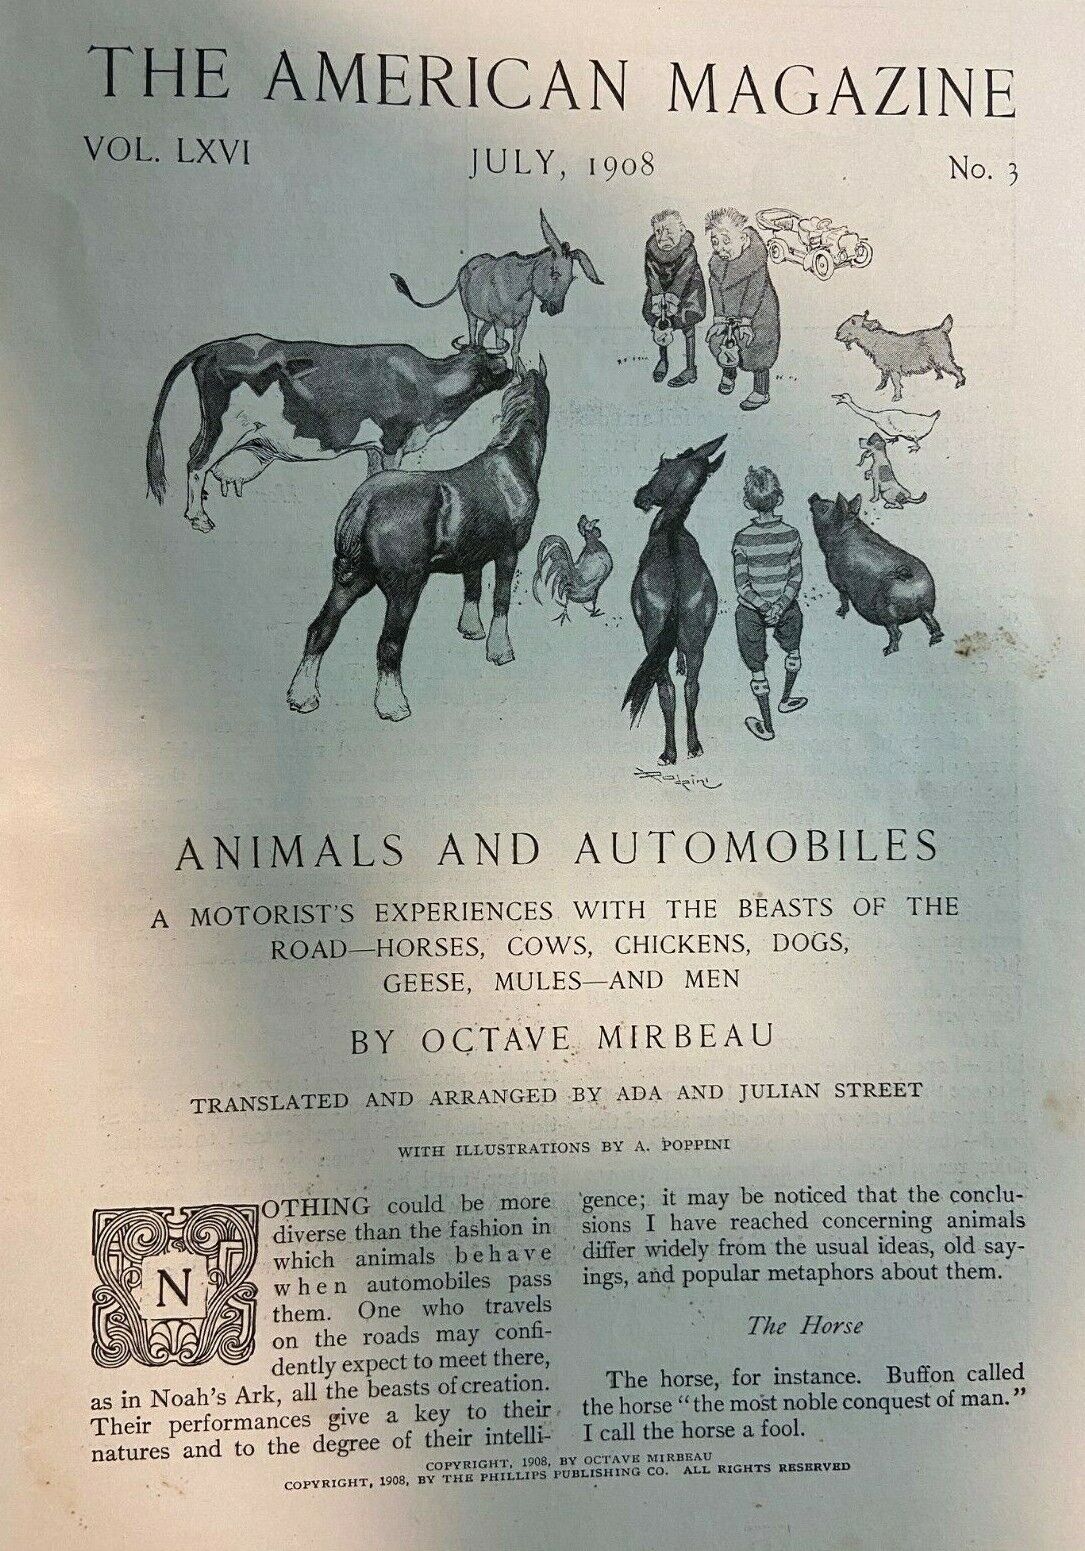 1908 Collision of Animals and Automobiles on the Road illustrated